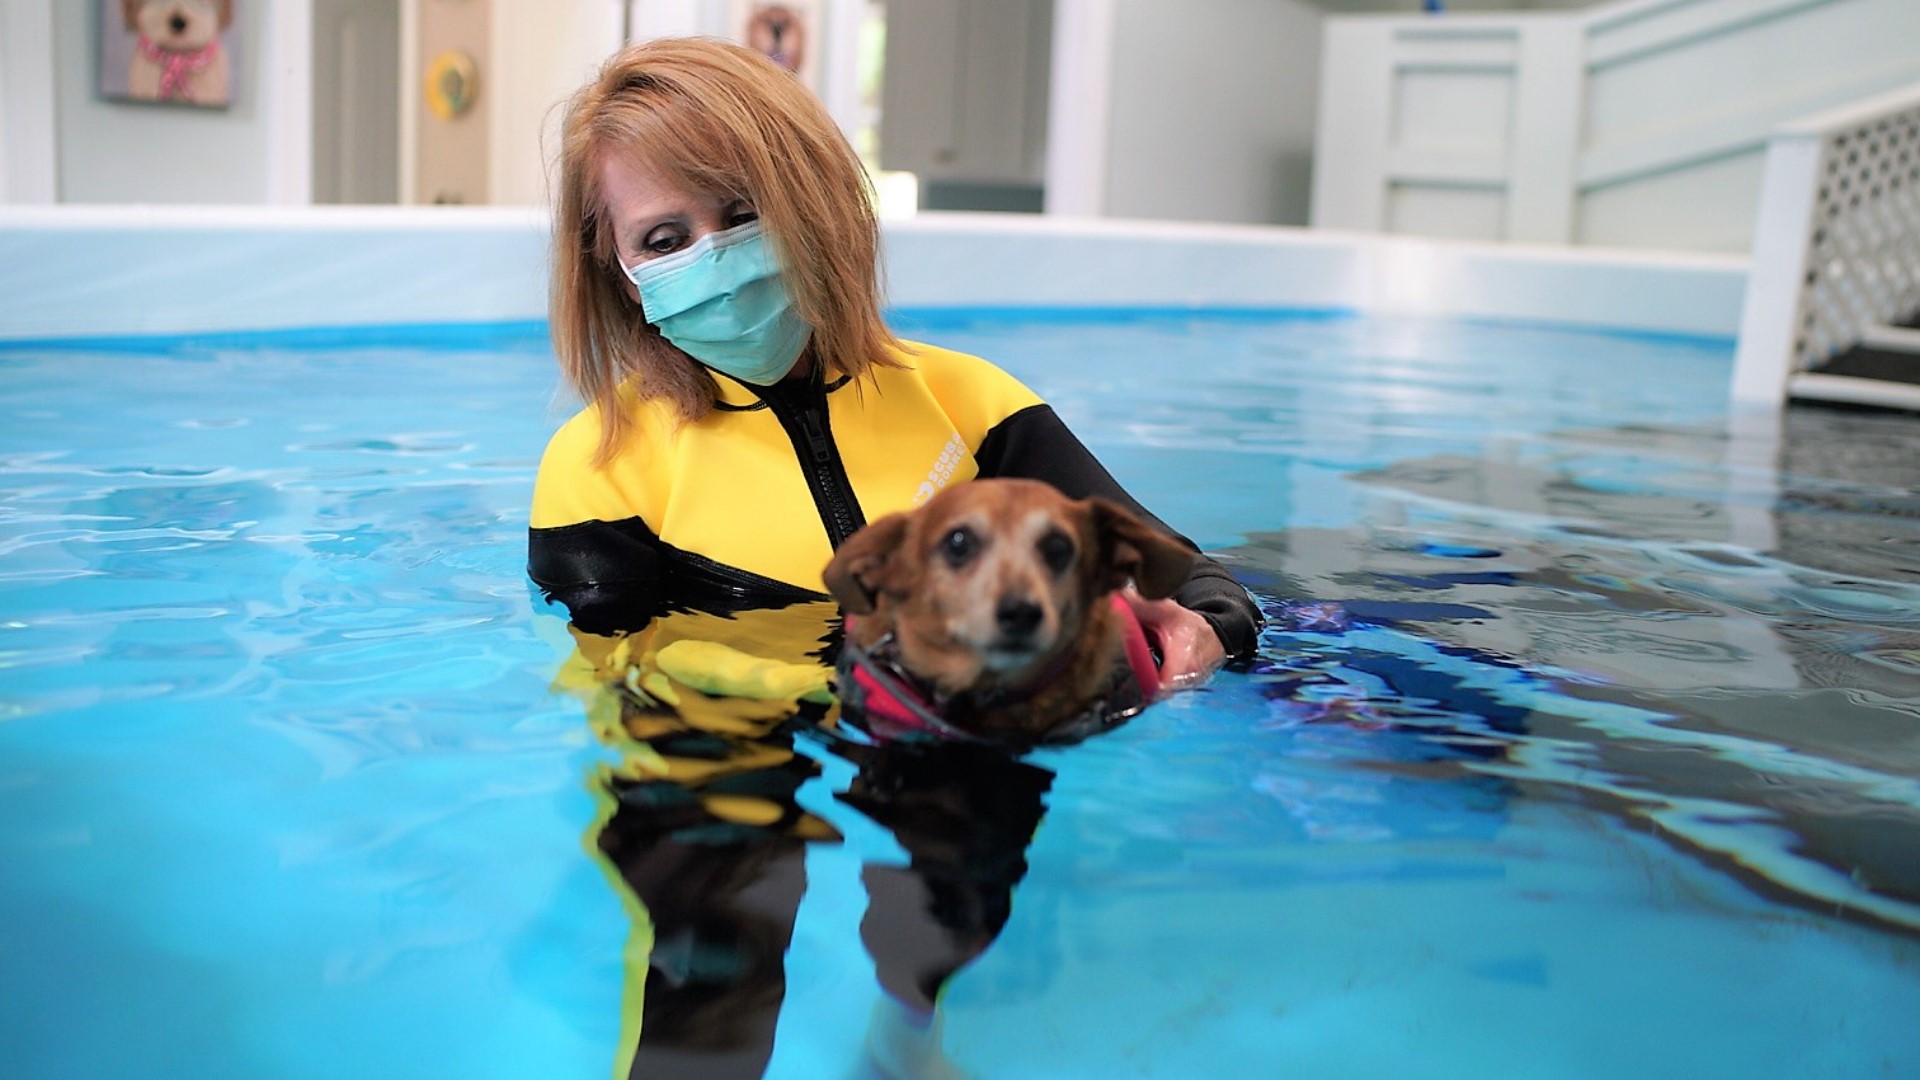 Owner Patti Jones says dog aquatics are great for hounds to blow off steam, learn to swim, exercise without joint pain, or help with weight loss